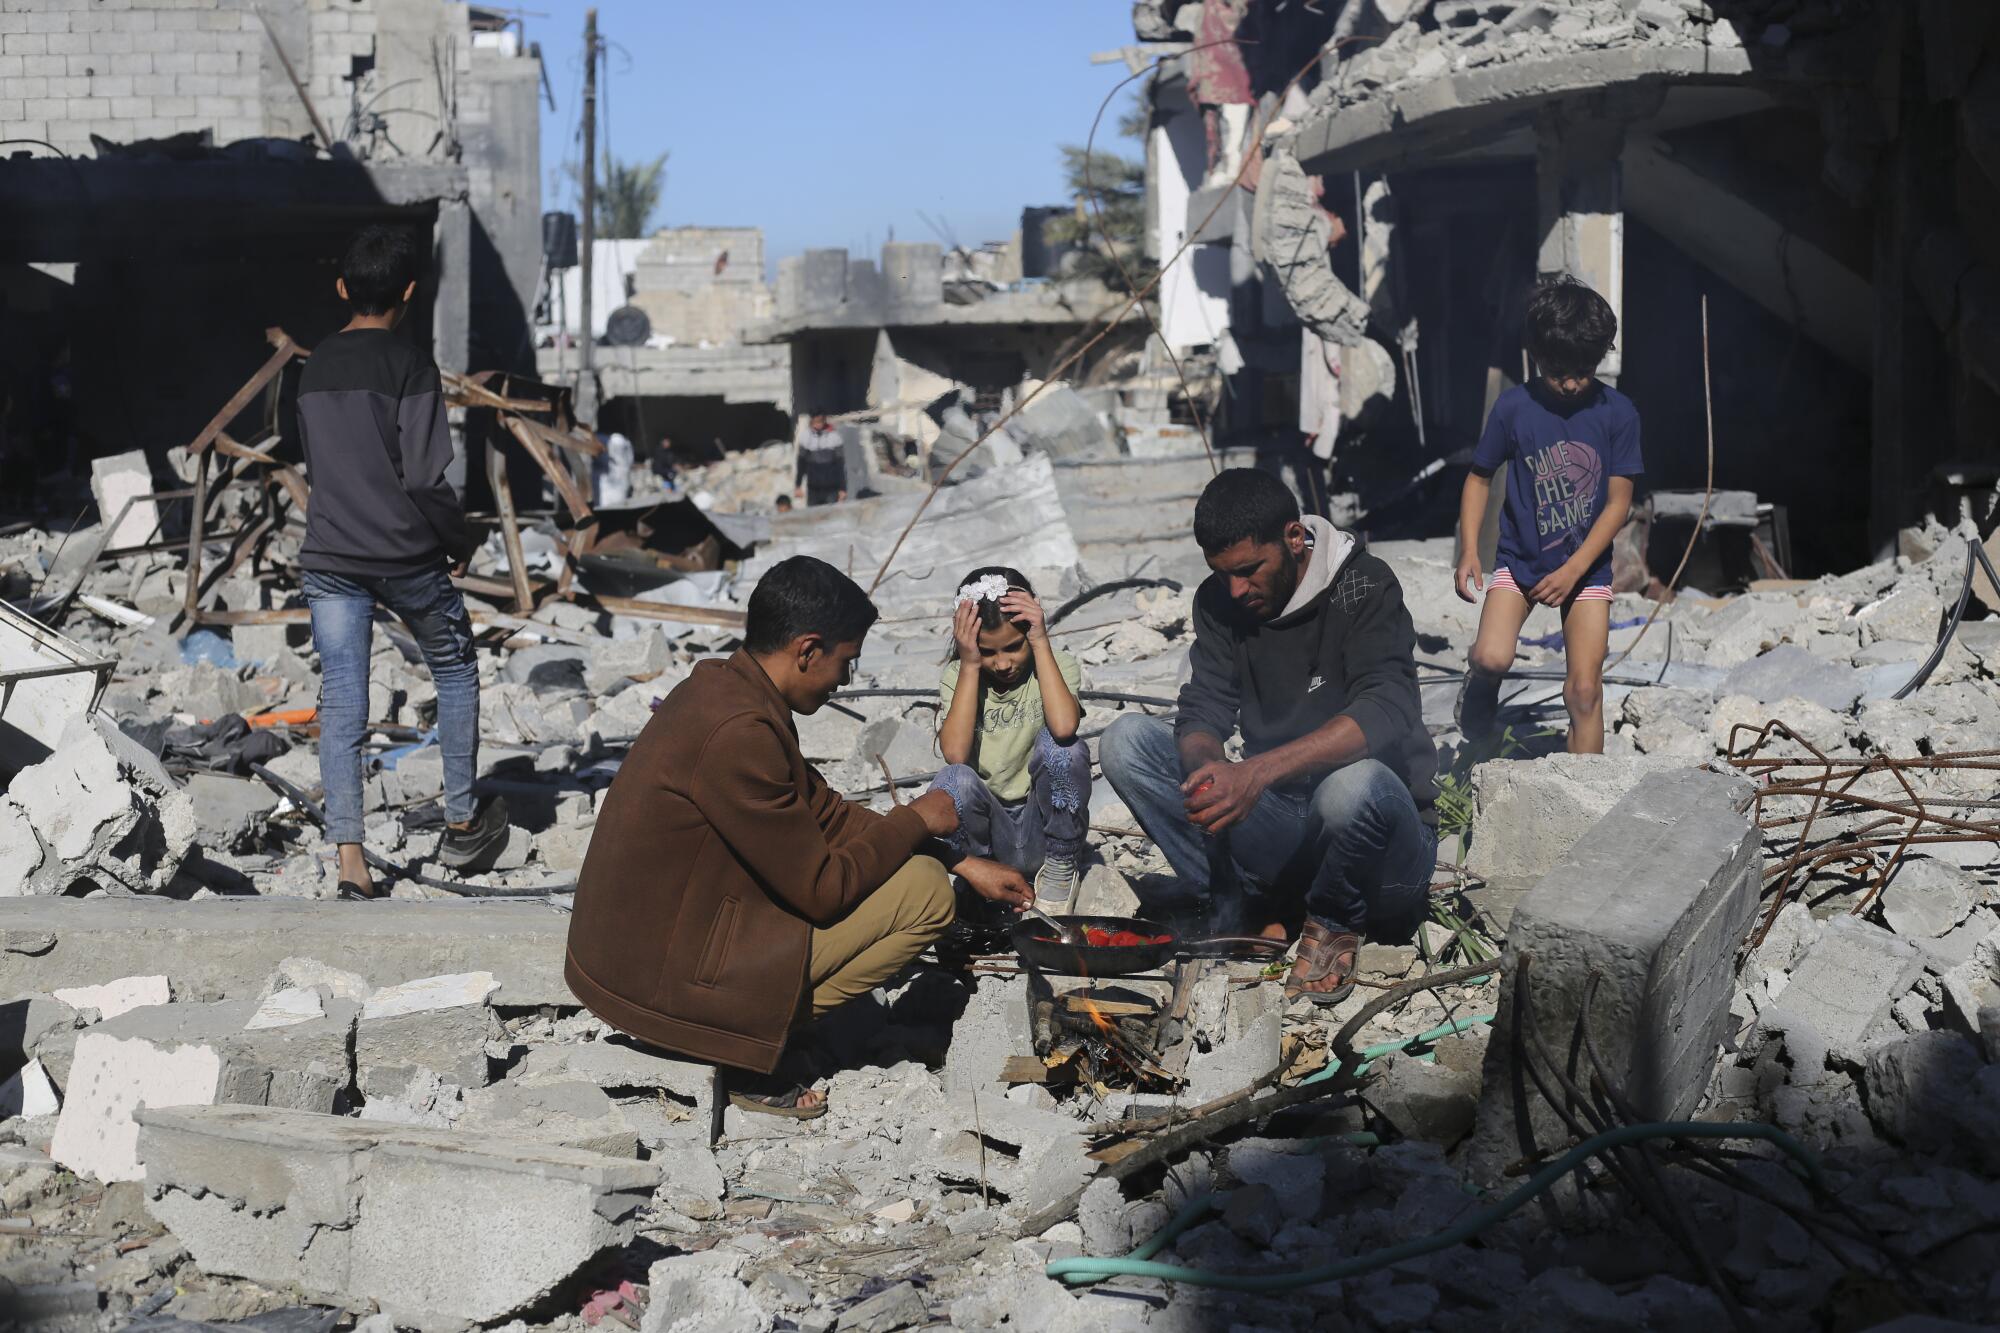 Gazans cooking bread by their destroyed homes during the temporary cease-fire